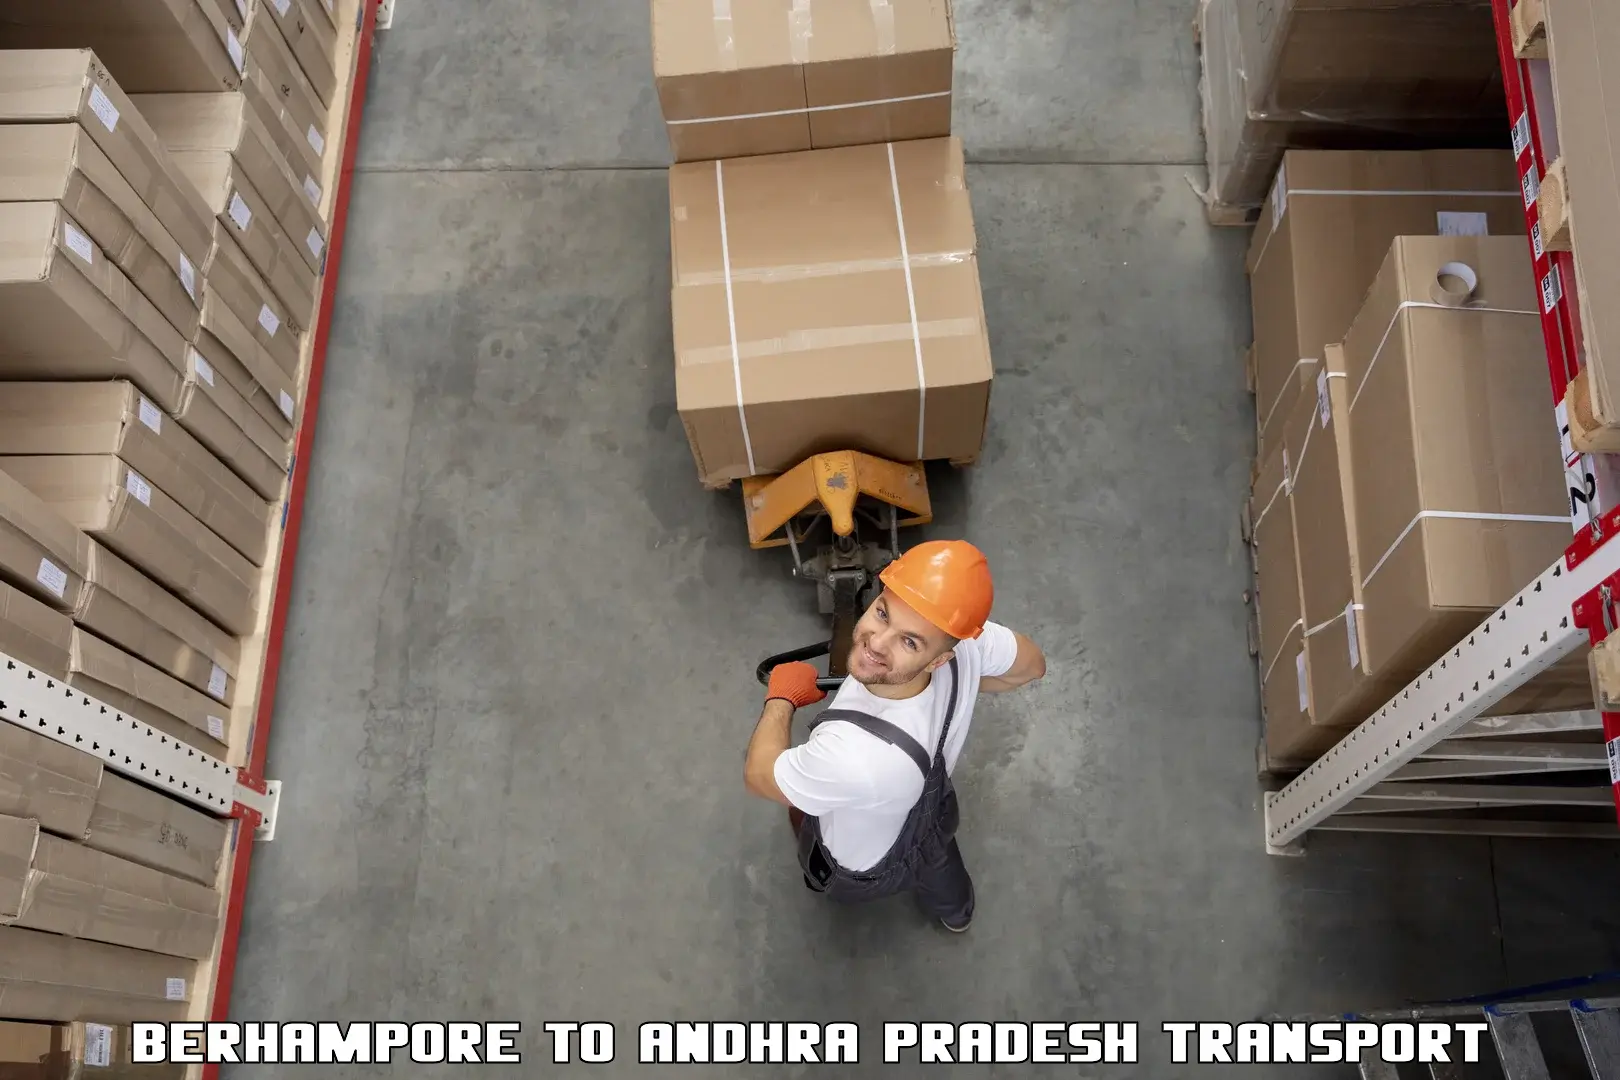 Air freight transport services Berhampore to Chandragiri